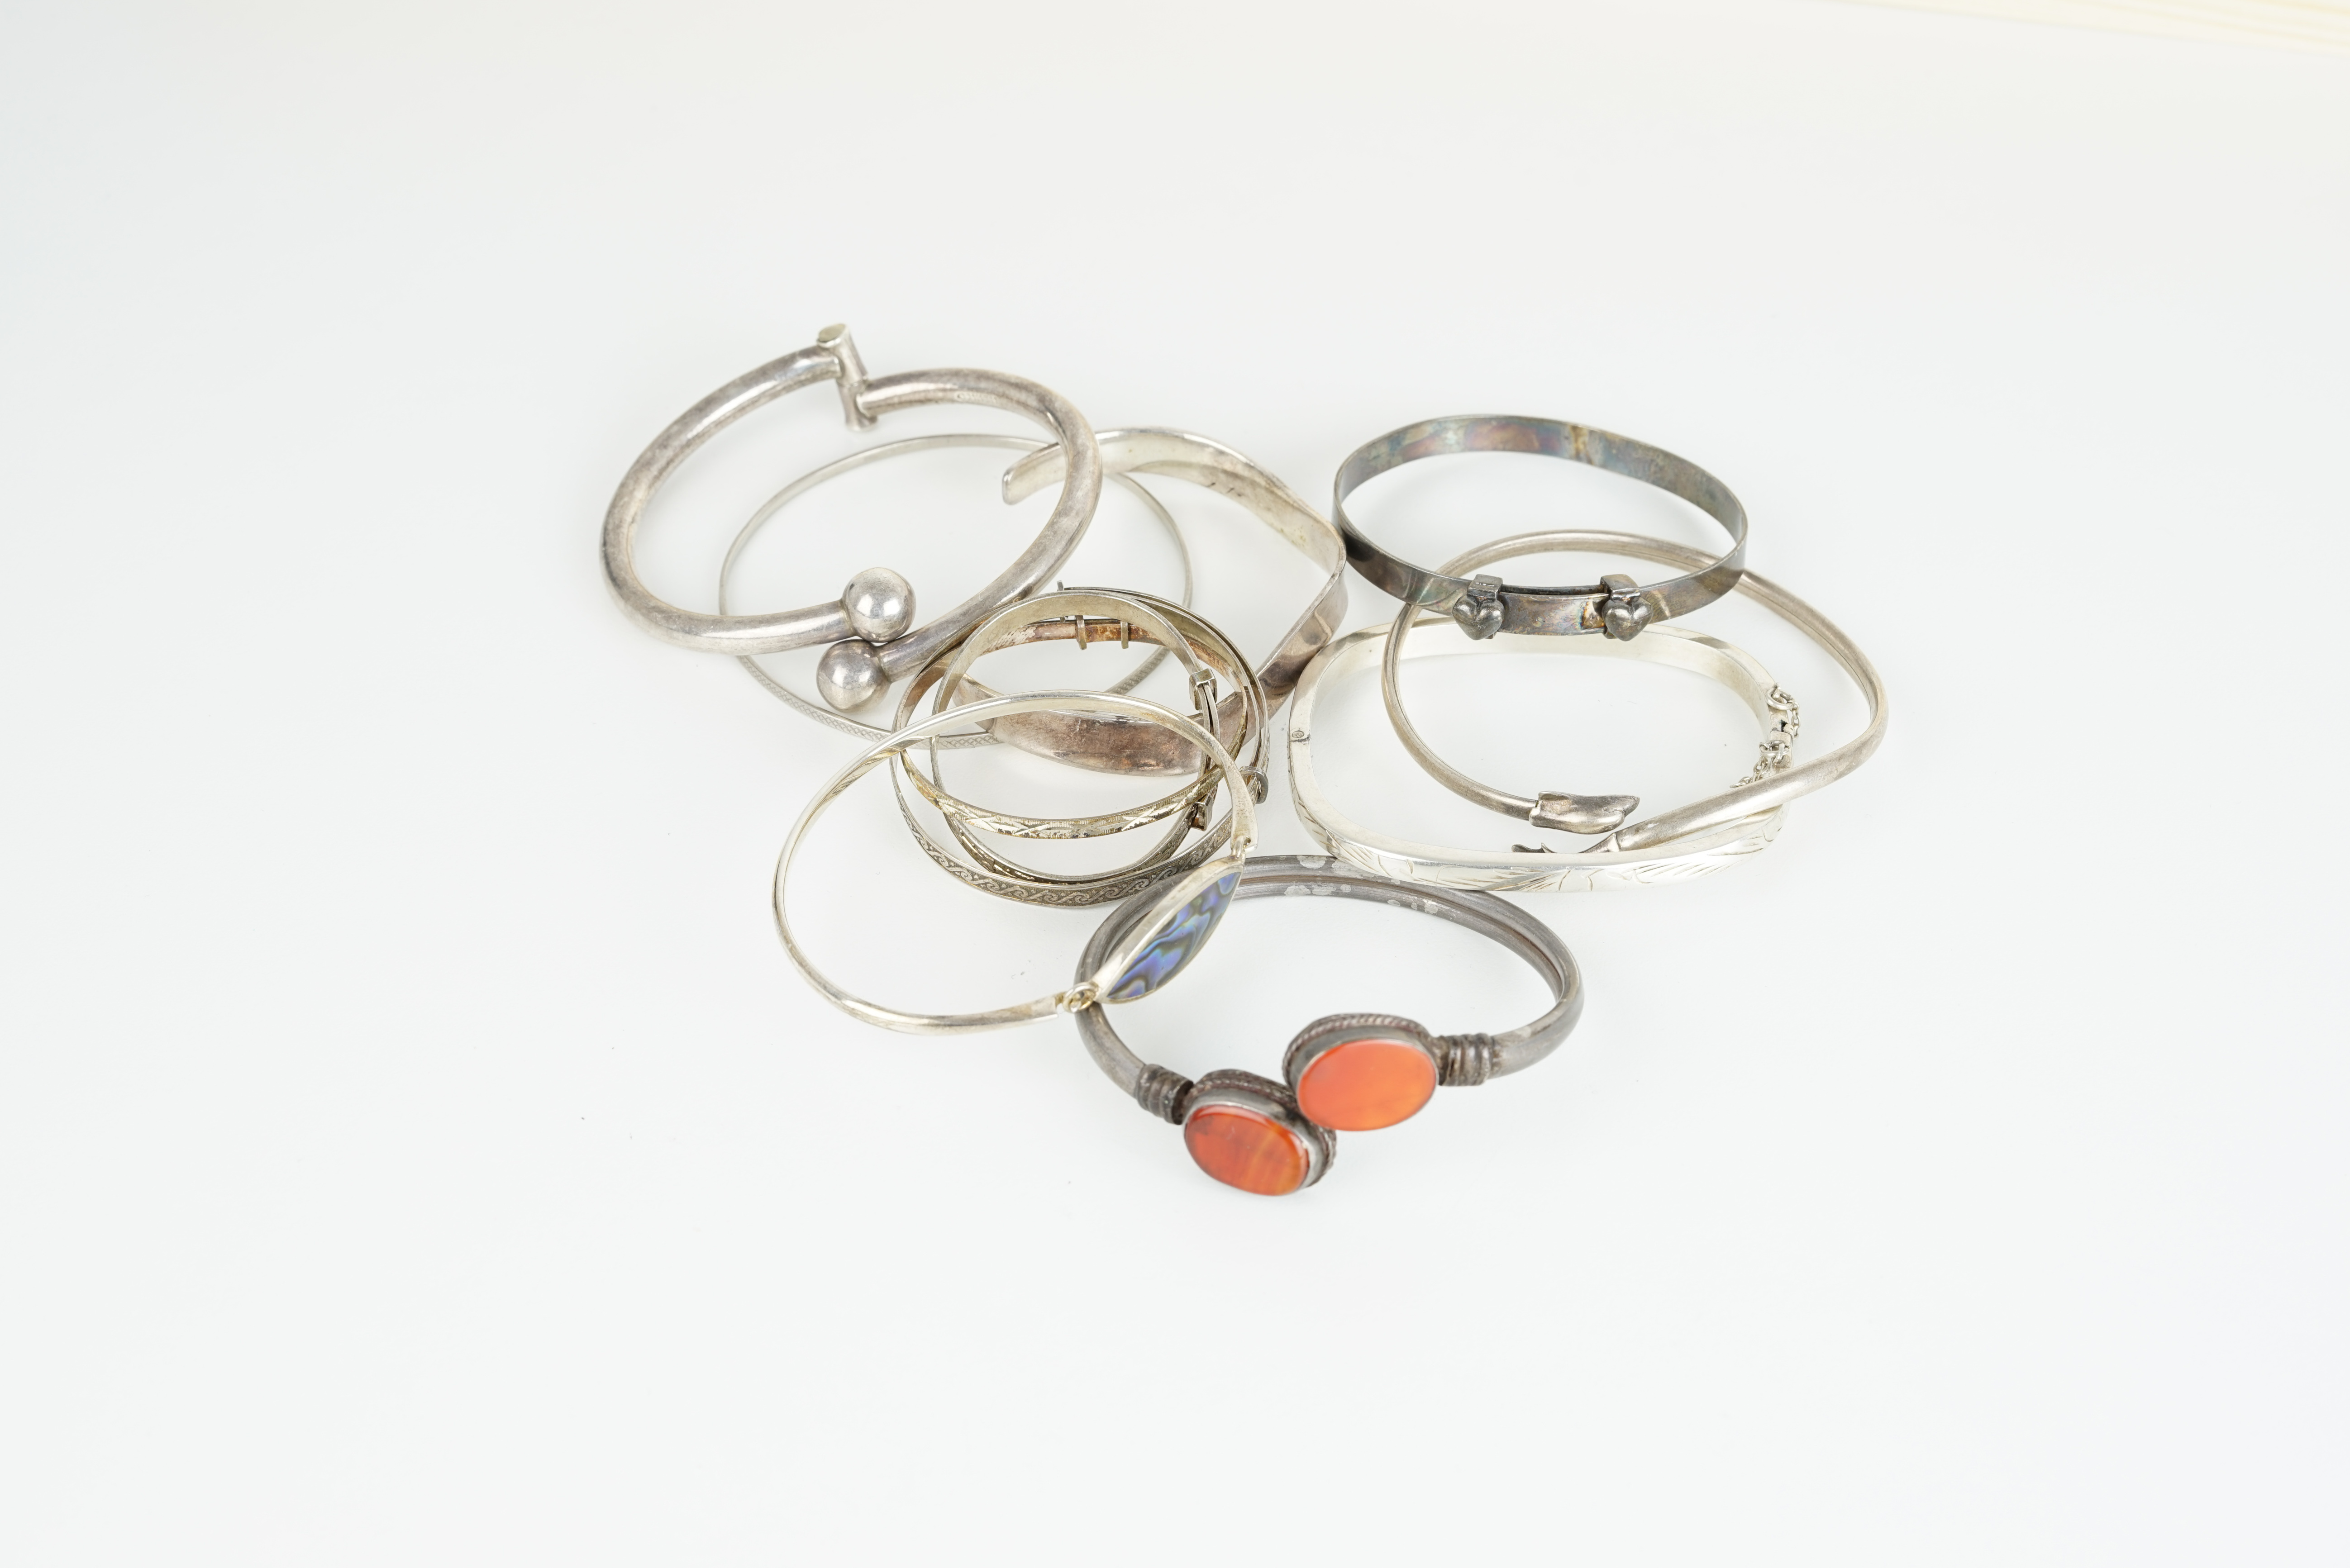 GROUP OF 11 SILVER BANGLES, sterling silver and silver bangles, cuffs, some adjustable, gem-set,